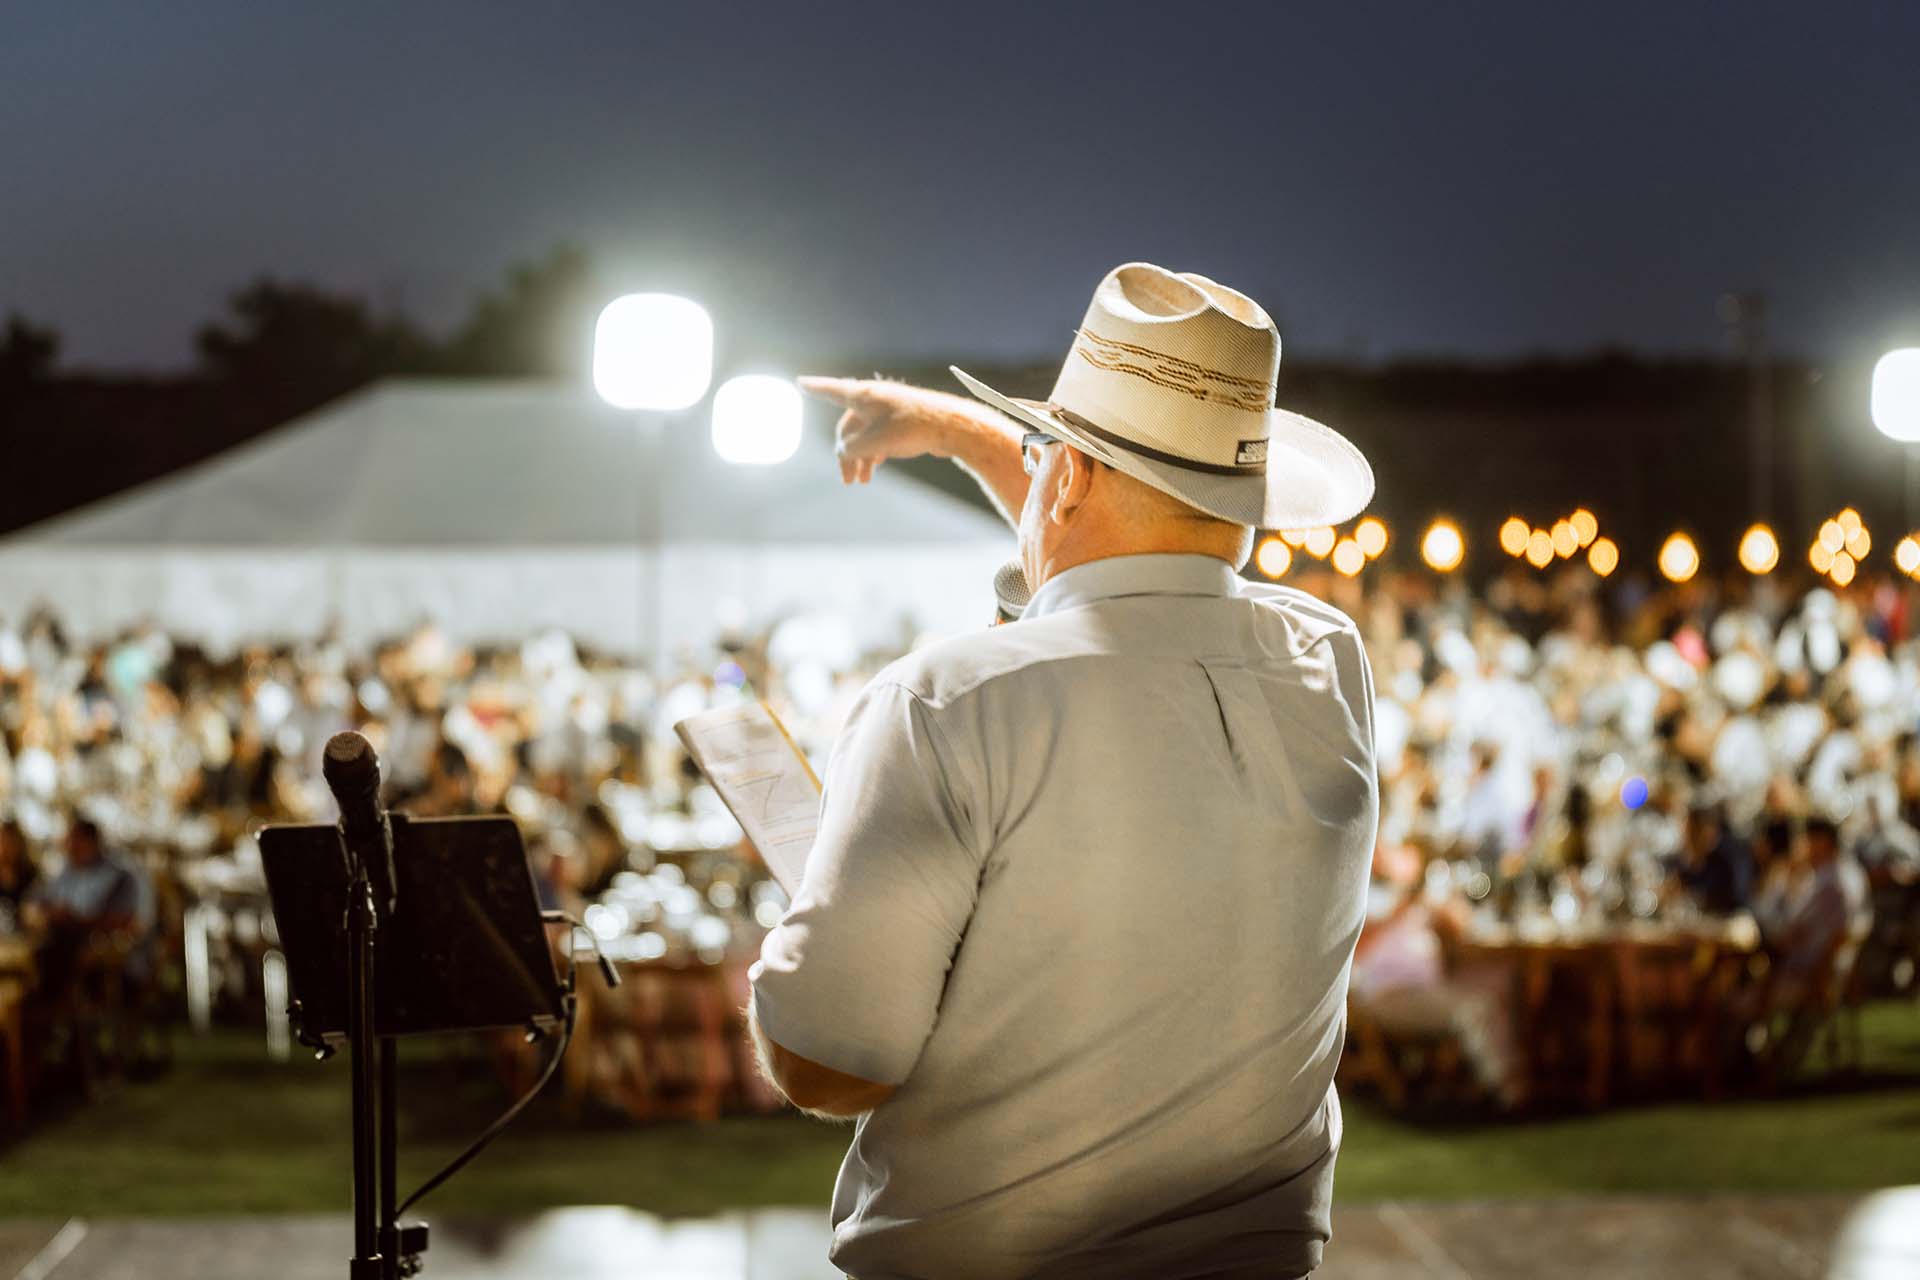 A man wearing a short-sleeved collared shirt, a cowboy hat, and glasses stands on a stage at June Jam 2023, holding a microphone and gesturing towards a crowd. The audience, seated at dining tables, fills the outdoor venue under the night sky. In the backdrop, a large event tent is illuminated with glowing lights, enhancing the festive atmosphere.